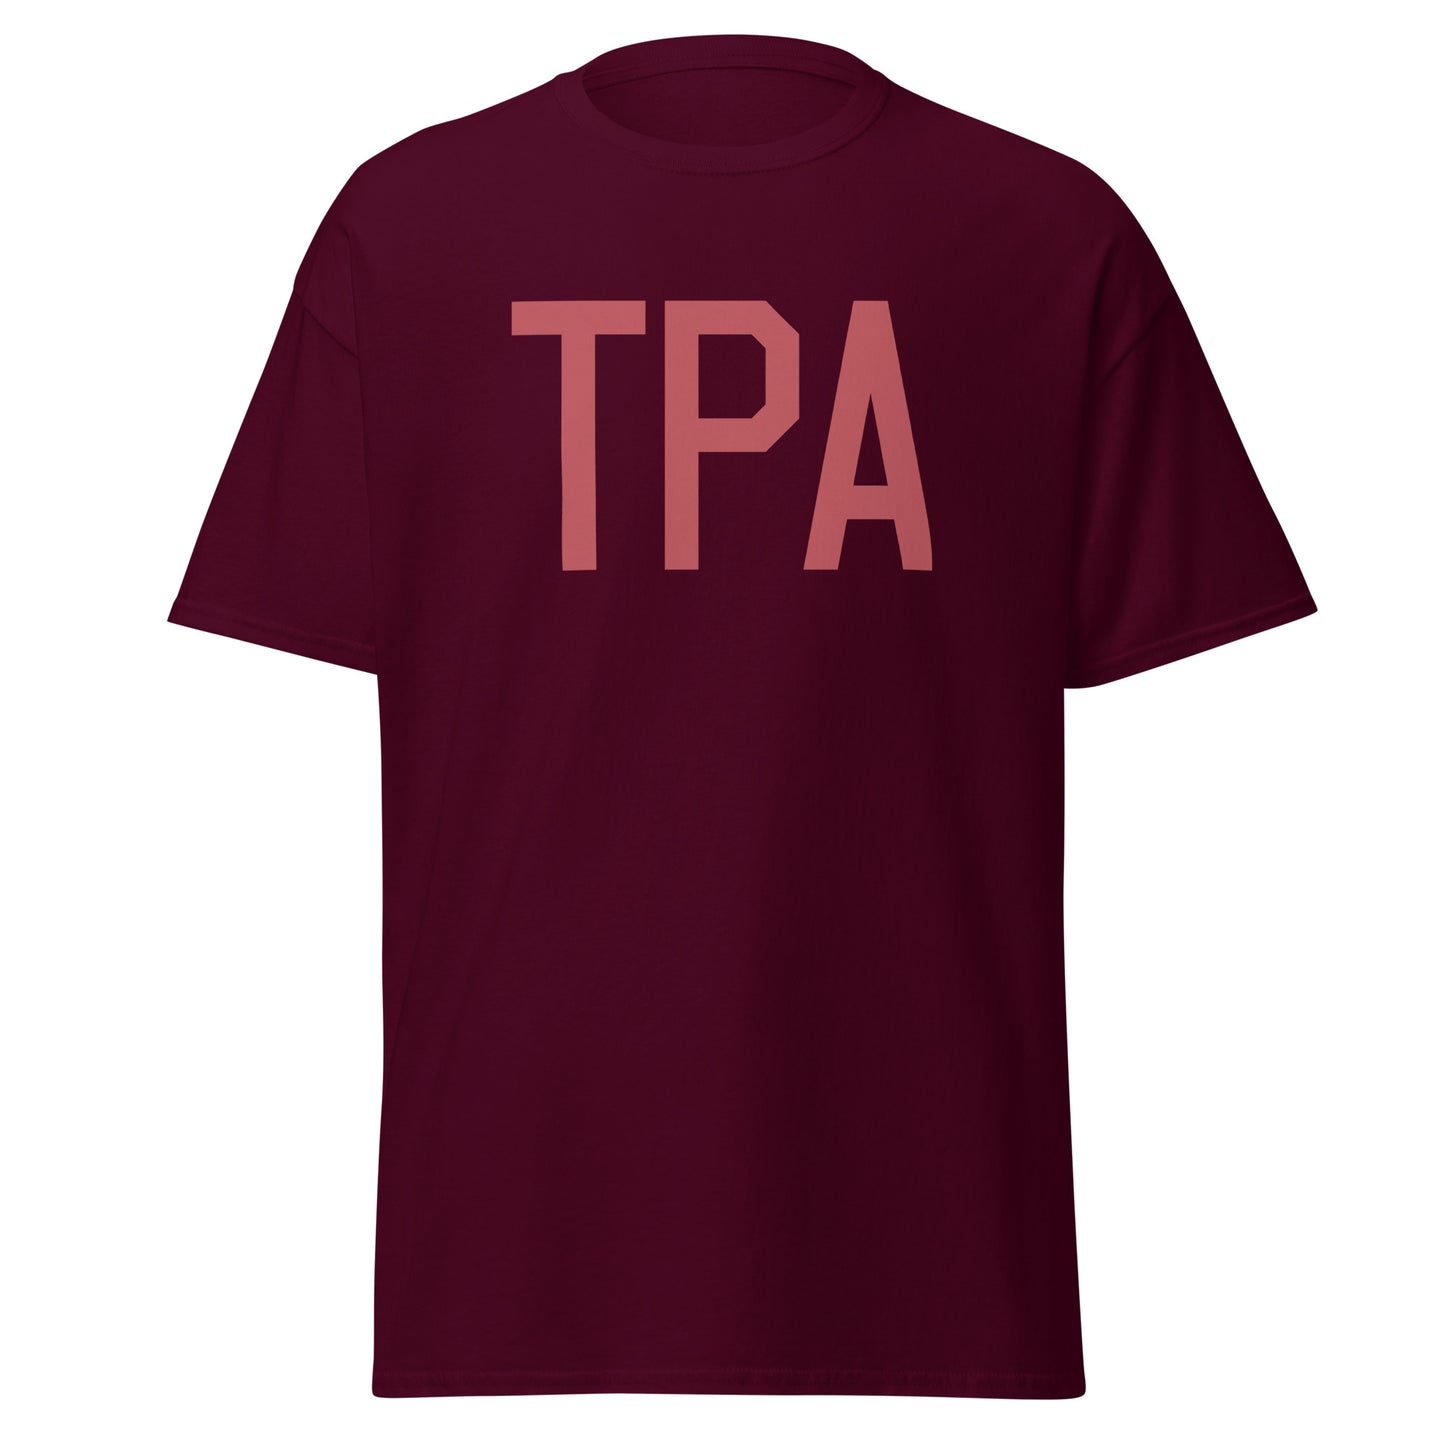 Aviation Enthusiast Men's Tee - Deep Pink Graphic • TPA Tampa • YHM Designs - Image 05